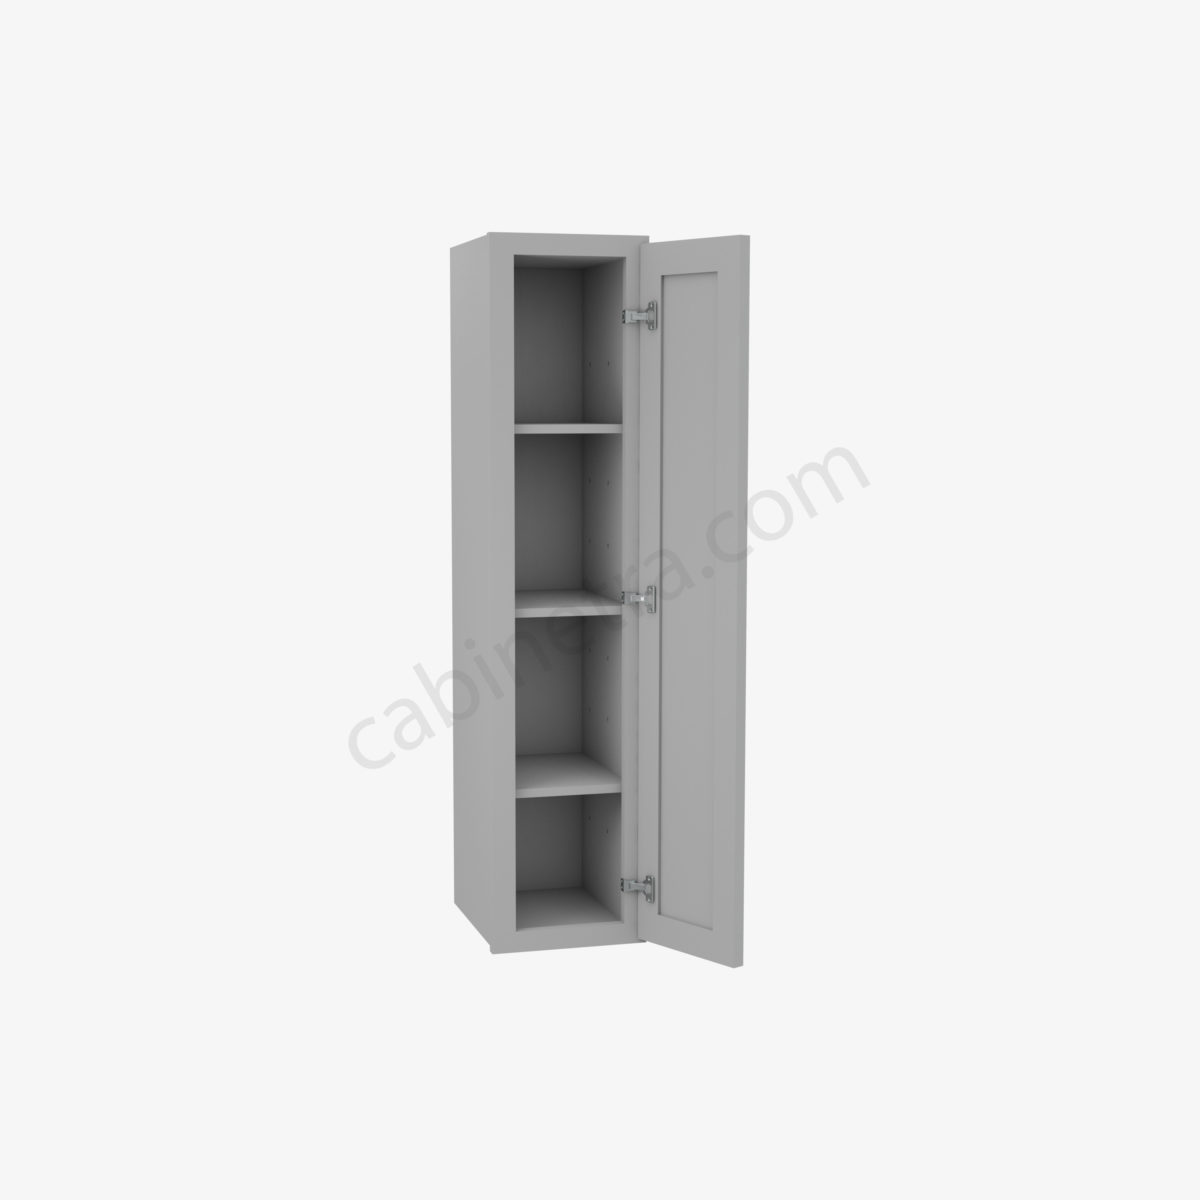 AB W0942 1 Forevermark Lait Gray Shaker Cabinetra scaled